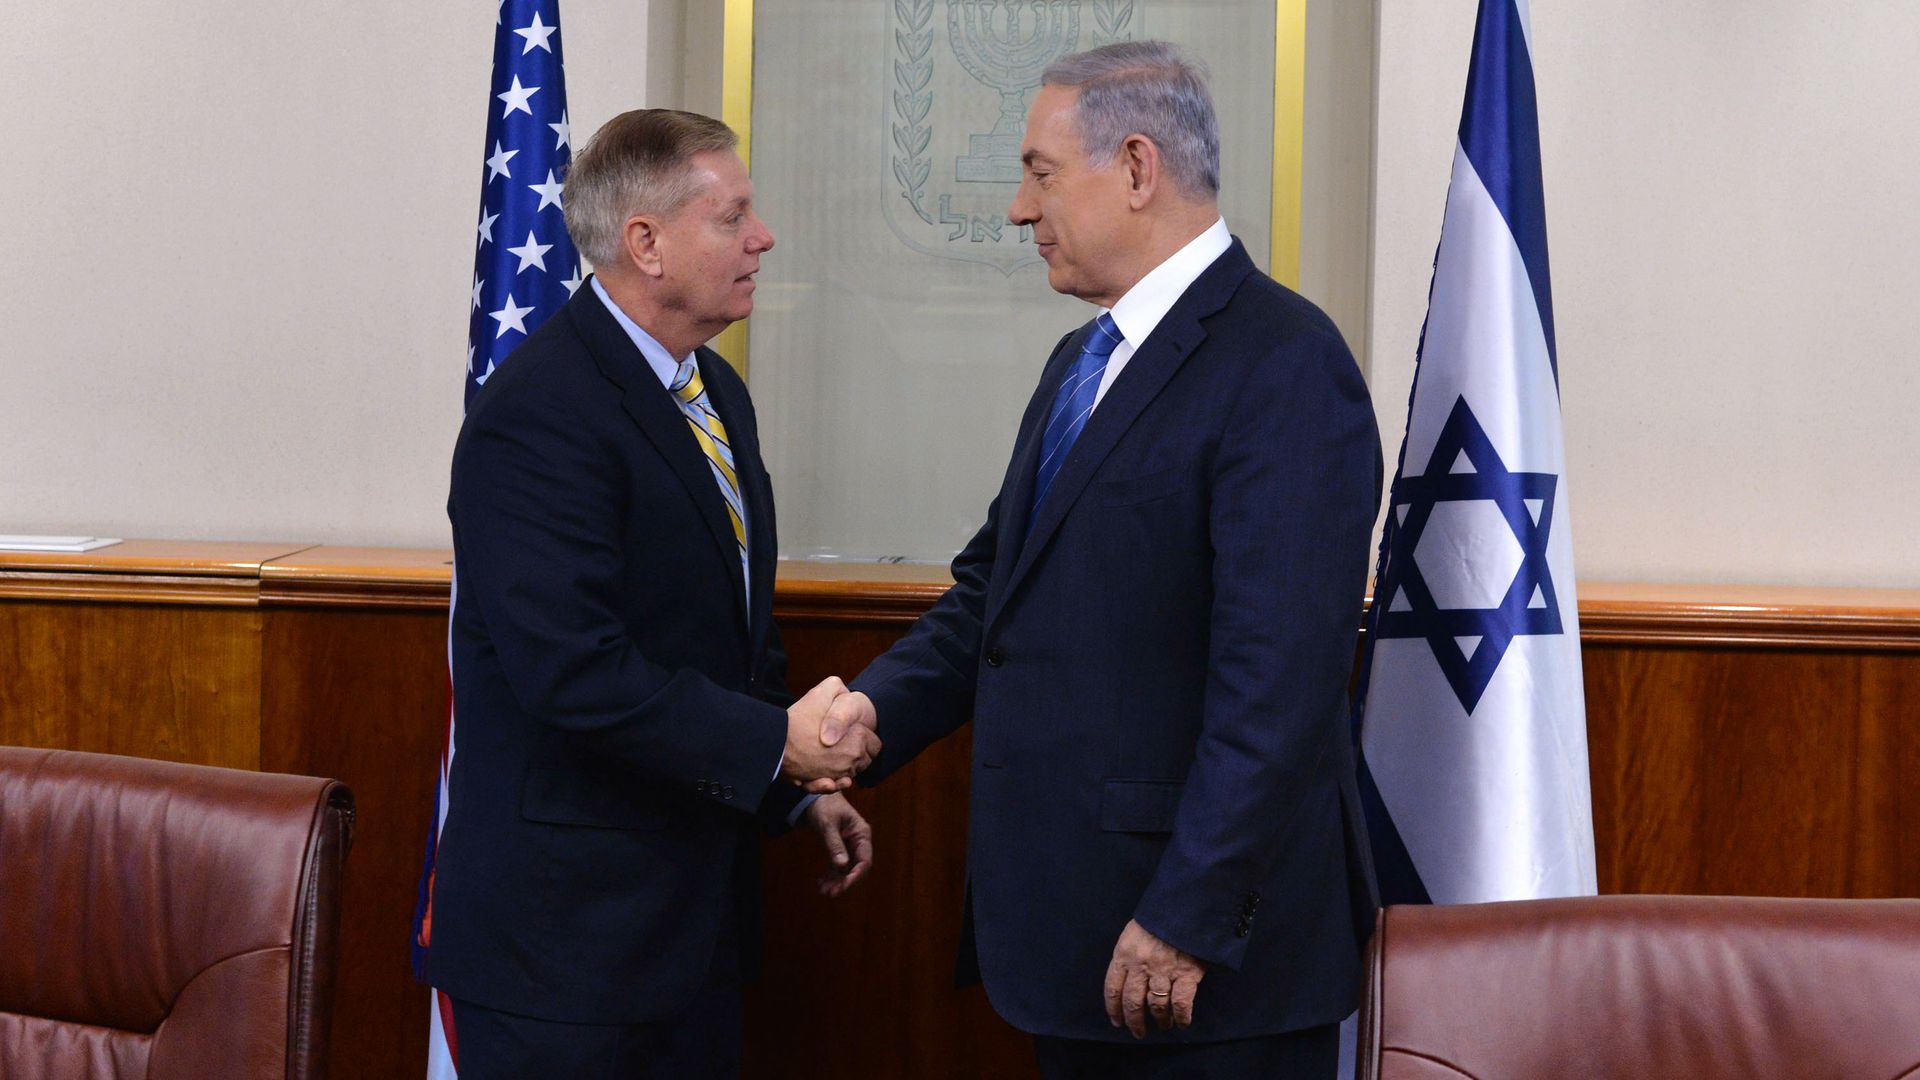 n this handout image provided by the Government Press Office, Israel Prime minister Benjamin Netanyahu (R) shakes hands with U.S. Senator Lindsey Graham (R-SC) 